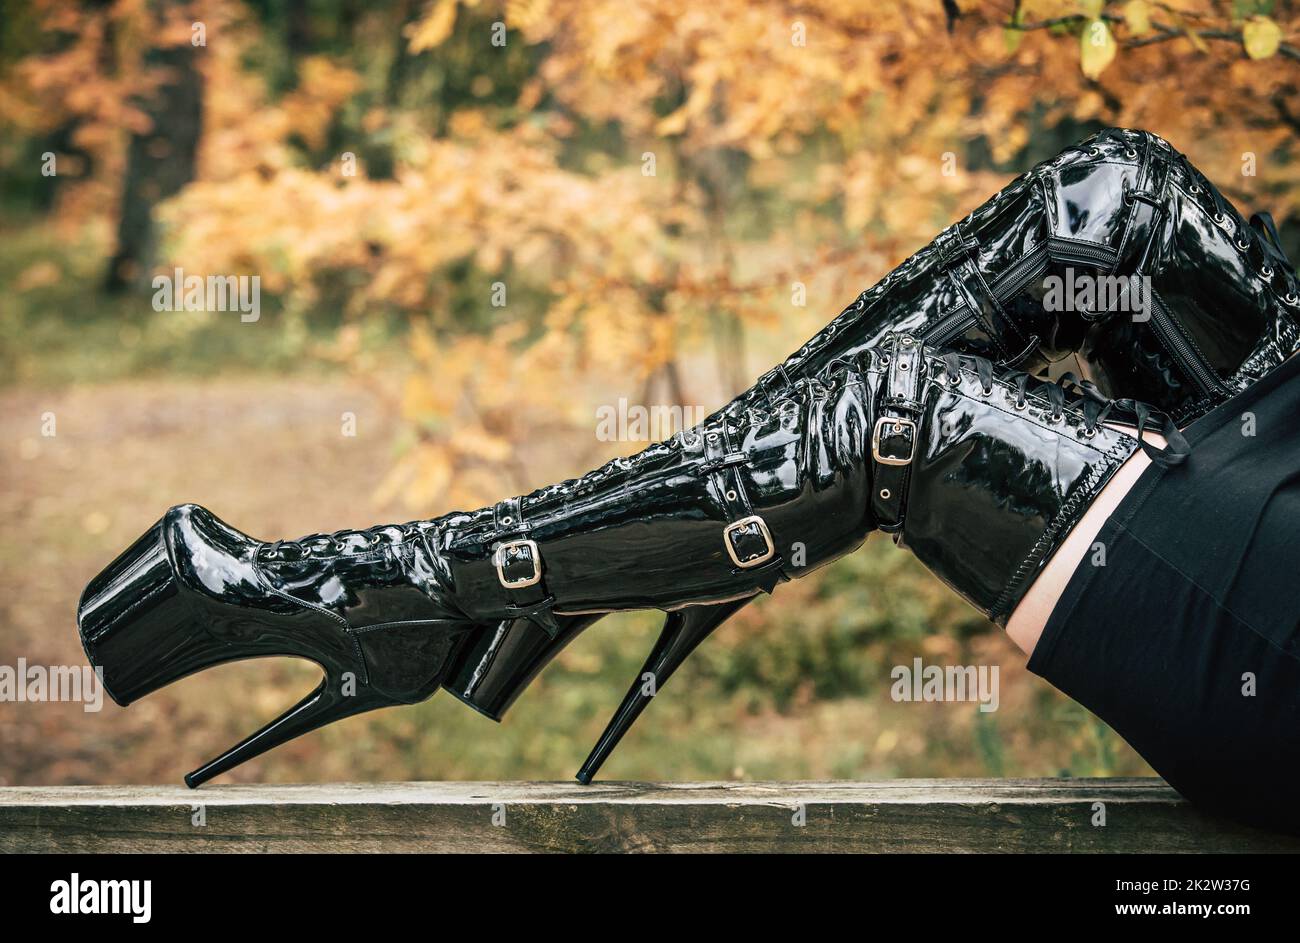 Artistic view of black high heels latex boots, pole dancer shoes. Selective focus on boots, blurred autumn leaves on background. Stock Photo